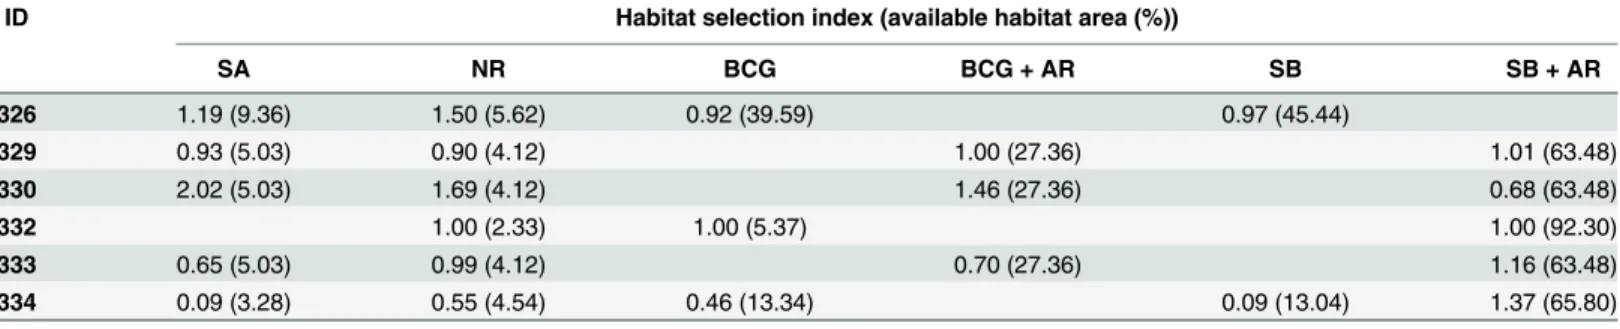 Table 3. Habitat selection index and available habitat area percentage for each tagged individual.